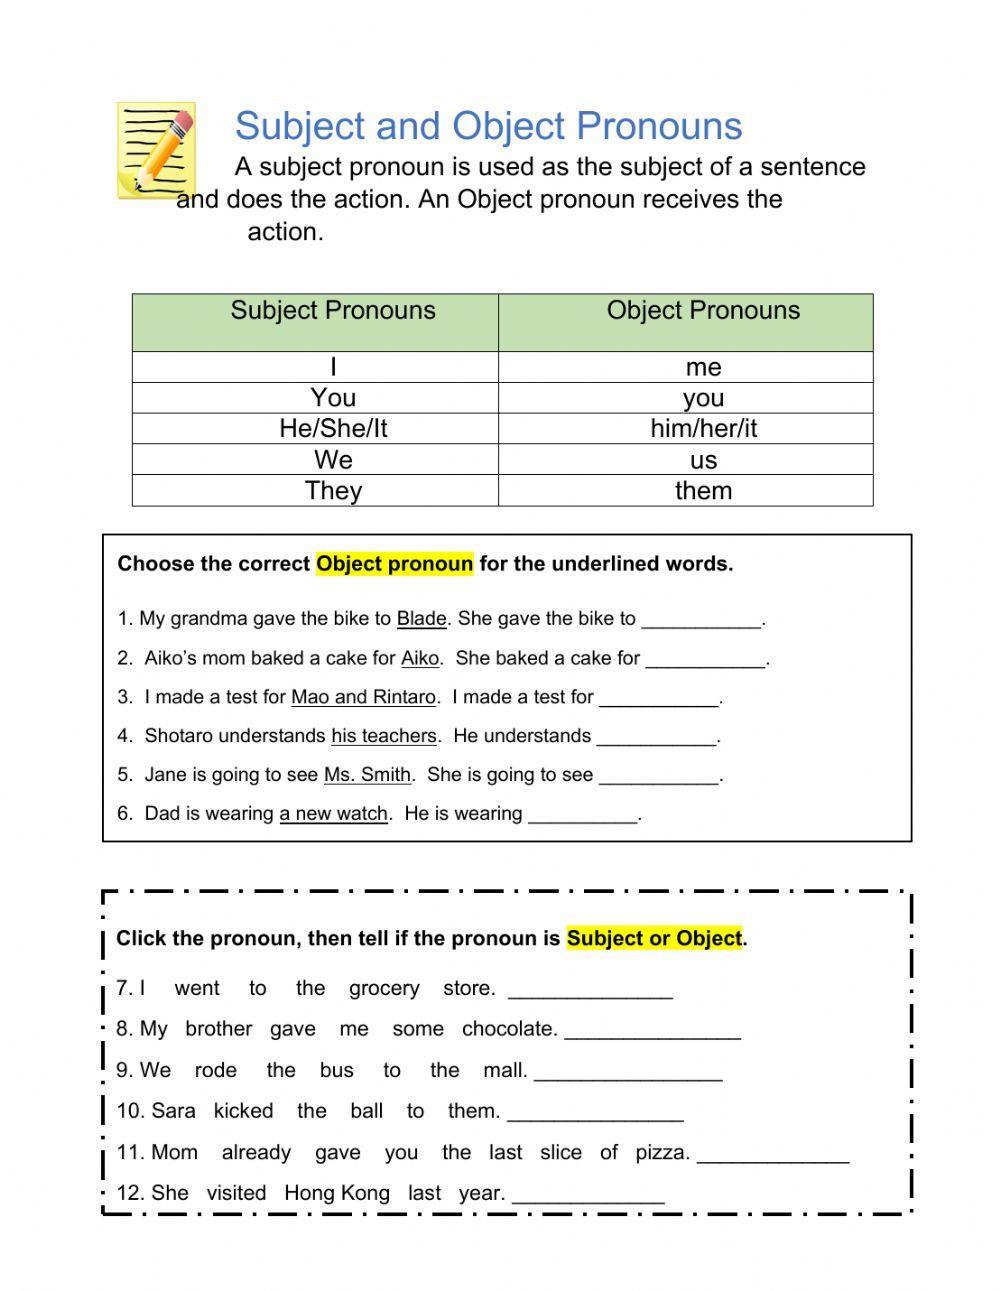 Subject and Object pronouns